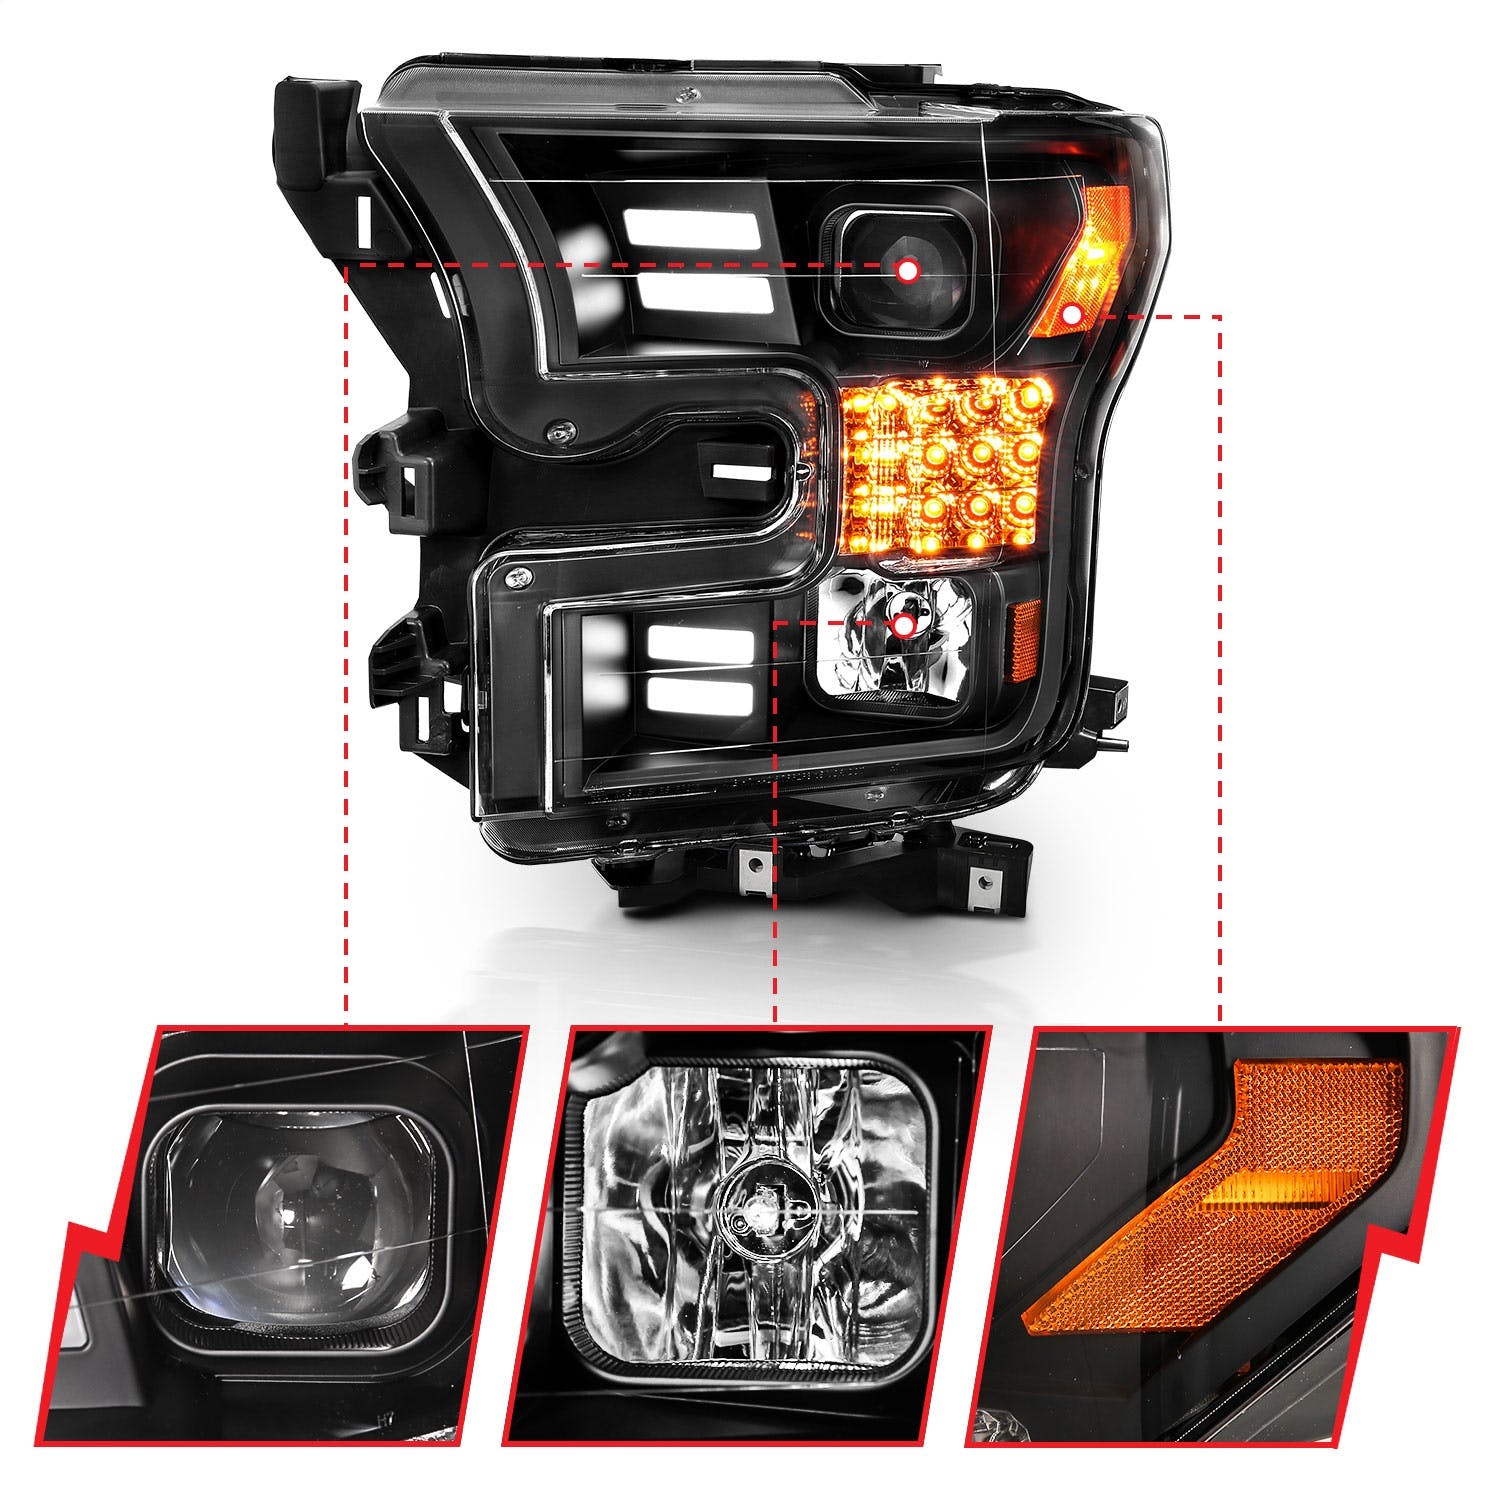 AnzoUSA 111408 Projector Headlights with Plank Style Design Black-Amber Sequential Turn Signal